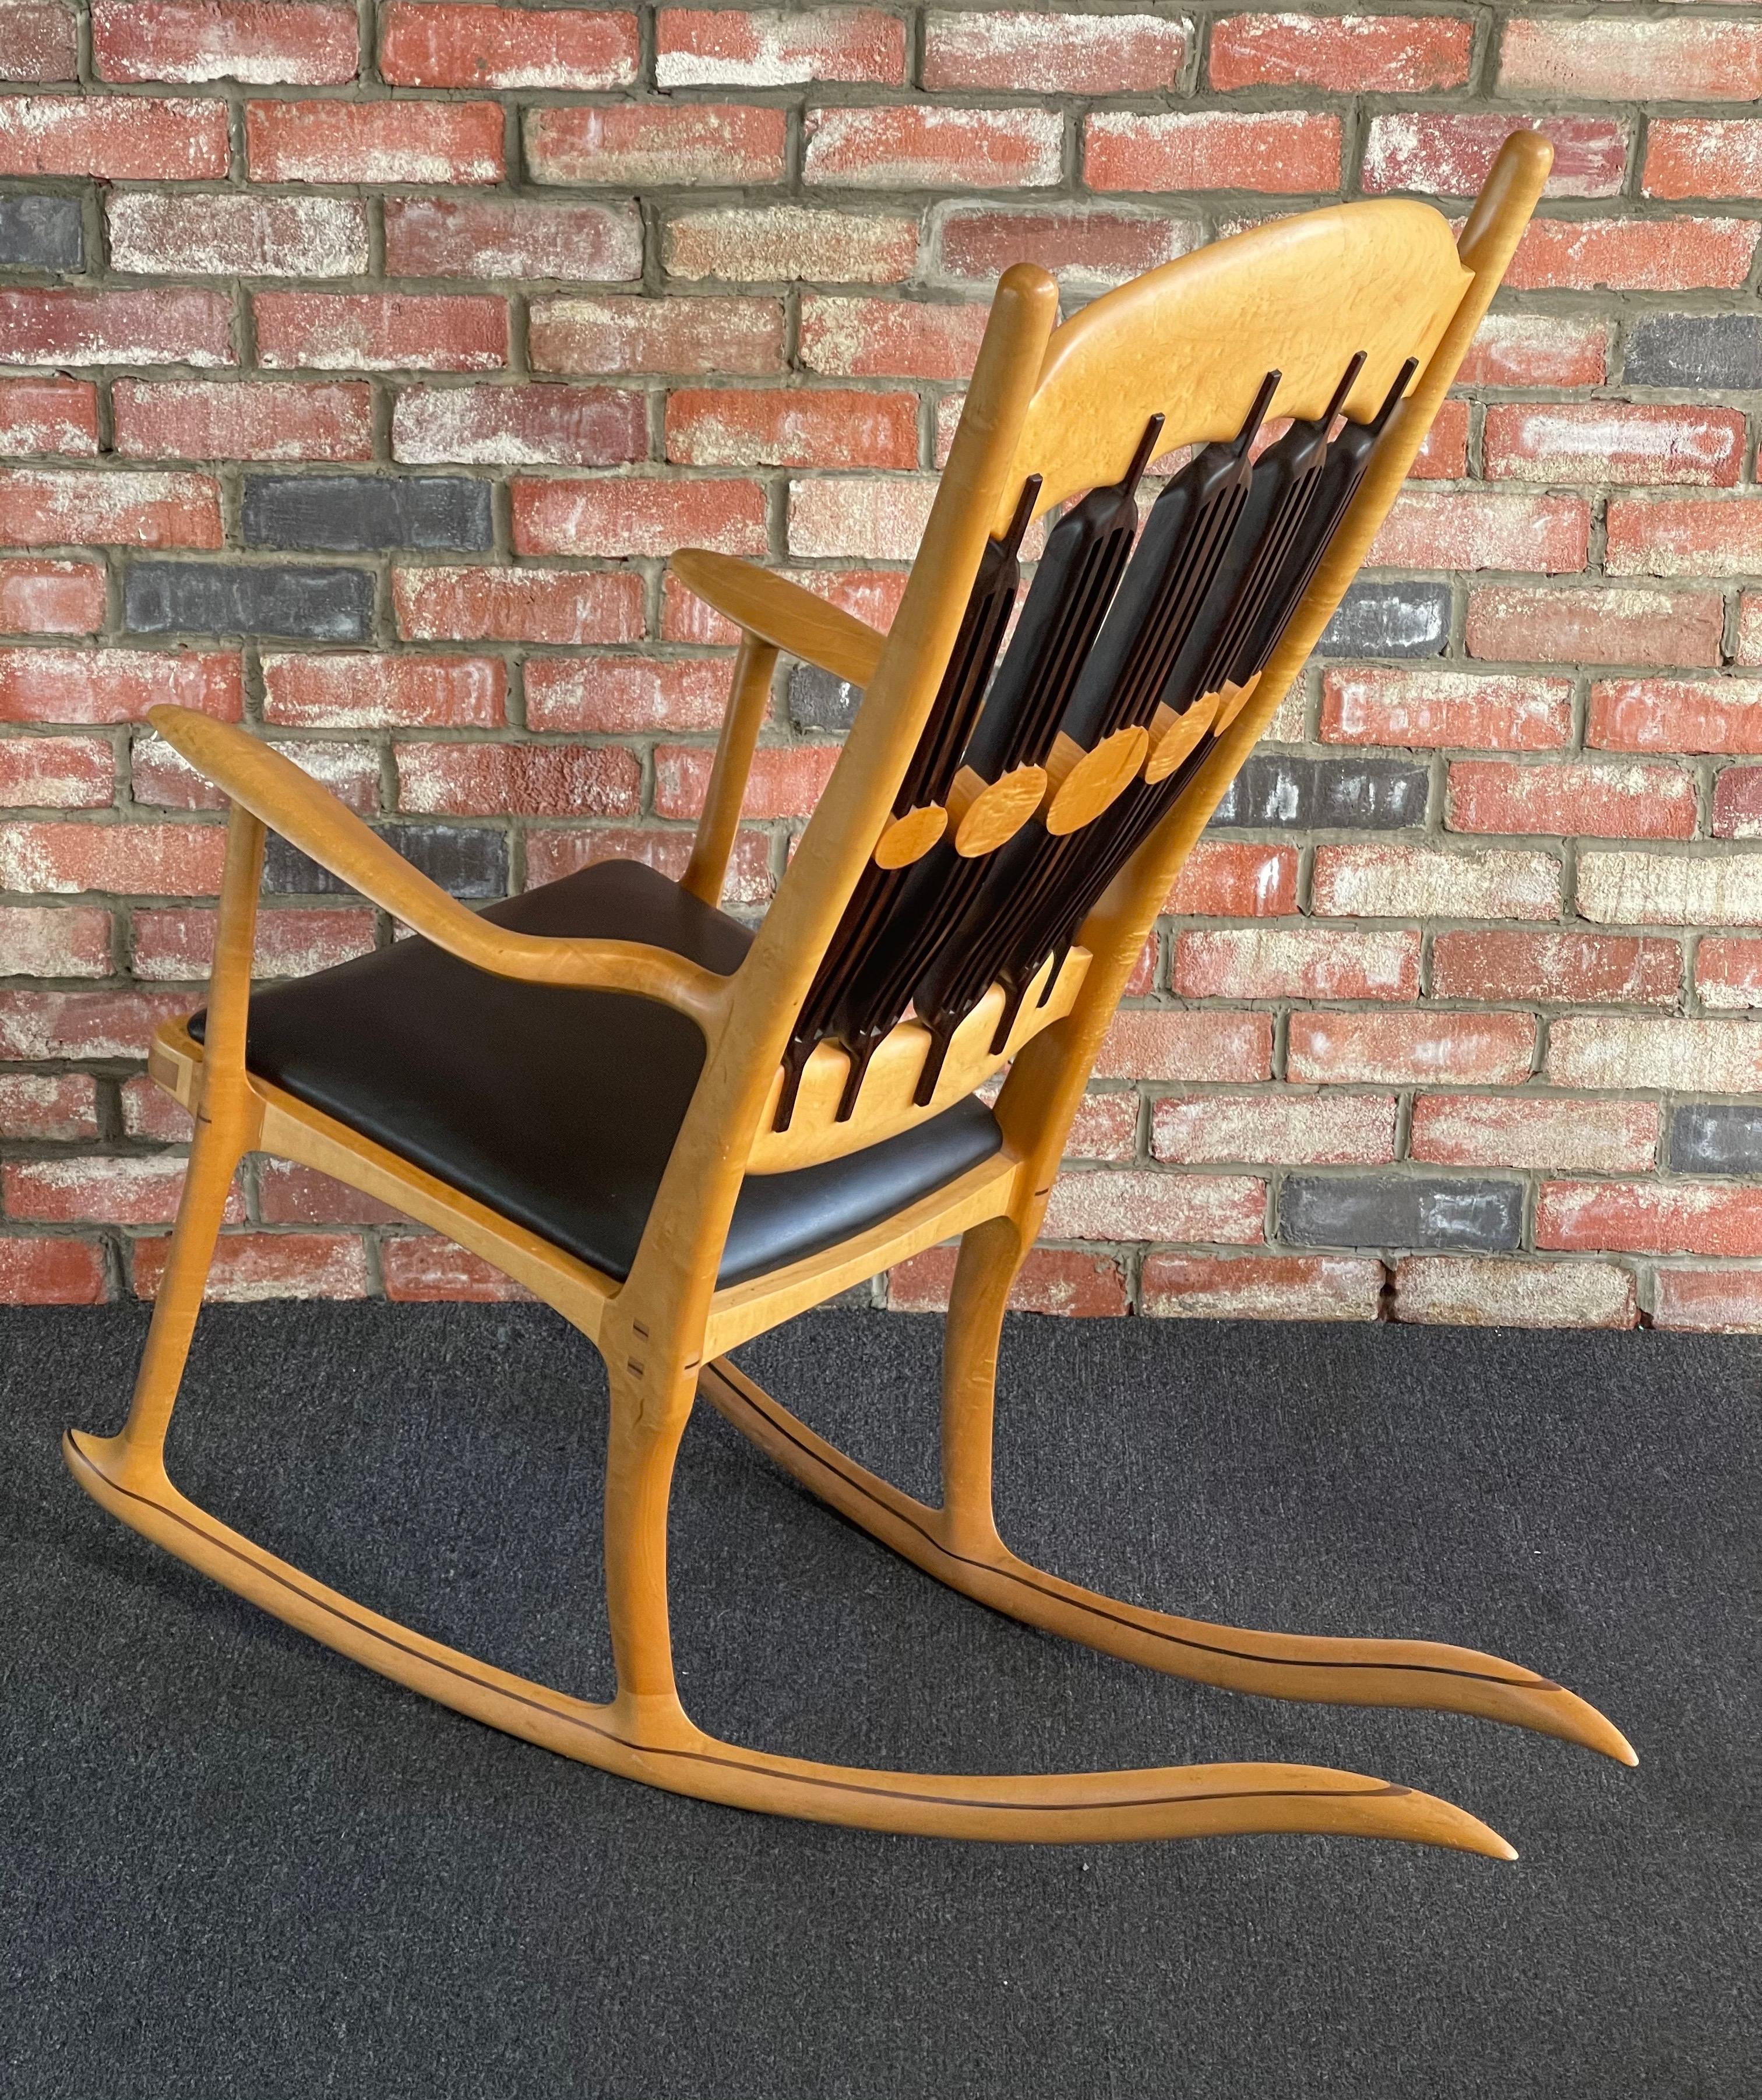 20th Century  Handcrafted Artisan Studio Rocking Chair by Jeffry Mann 1987 For Sale